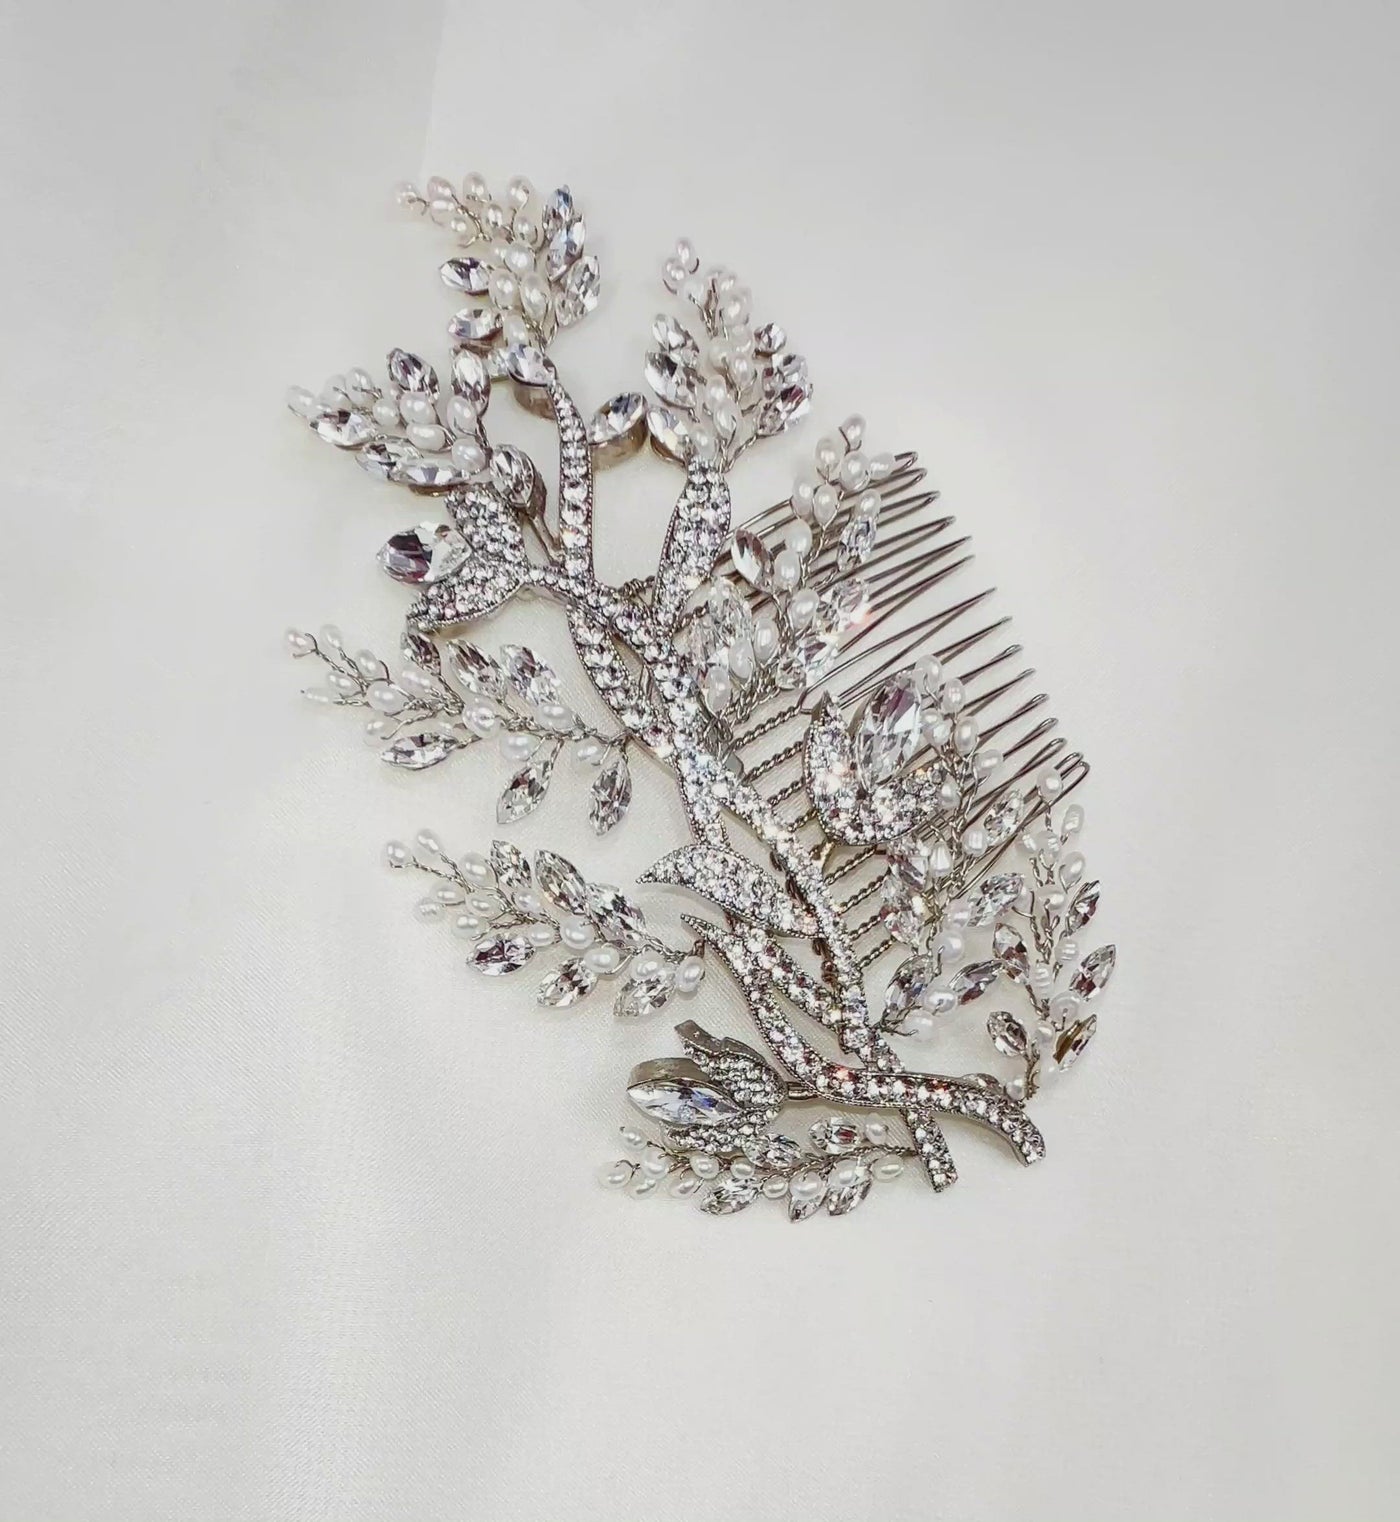 silver bridal hair comb with crystalized branches and sprigs of sparkling crystal and pearl